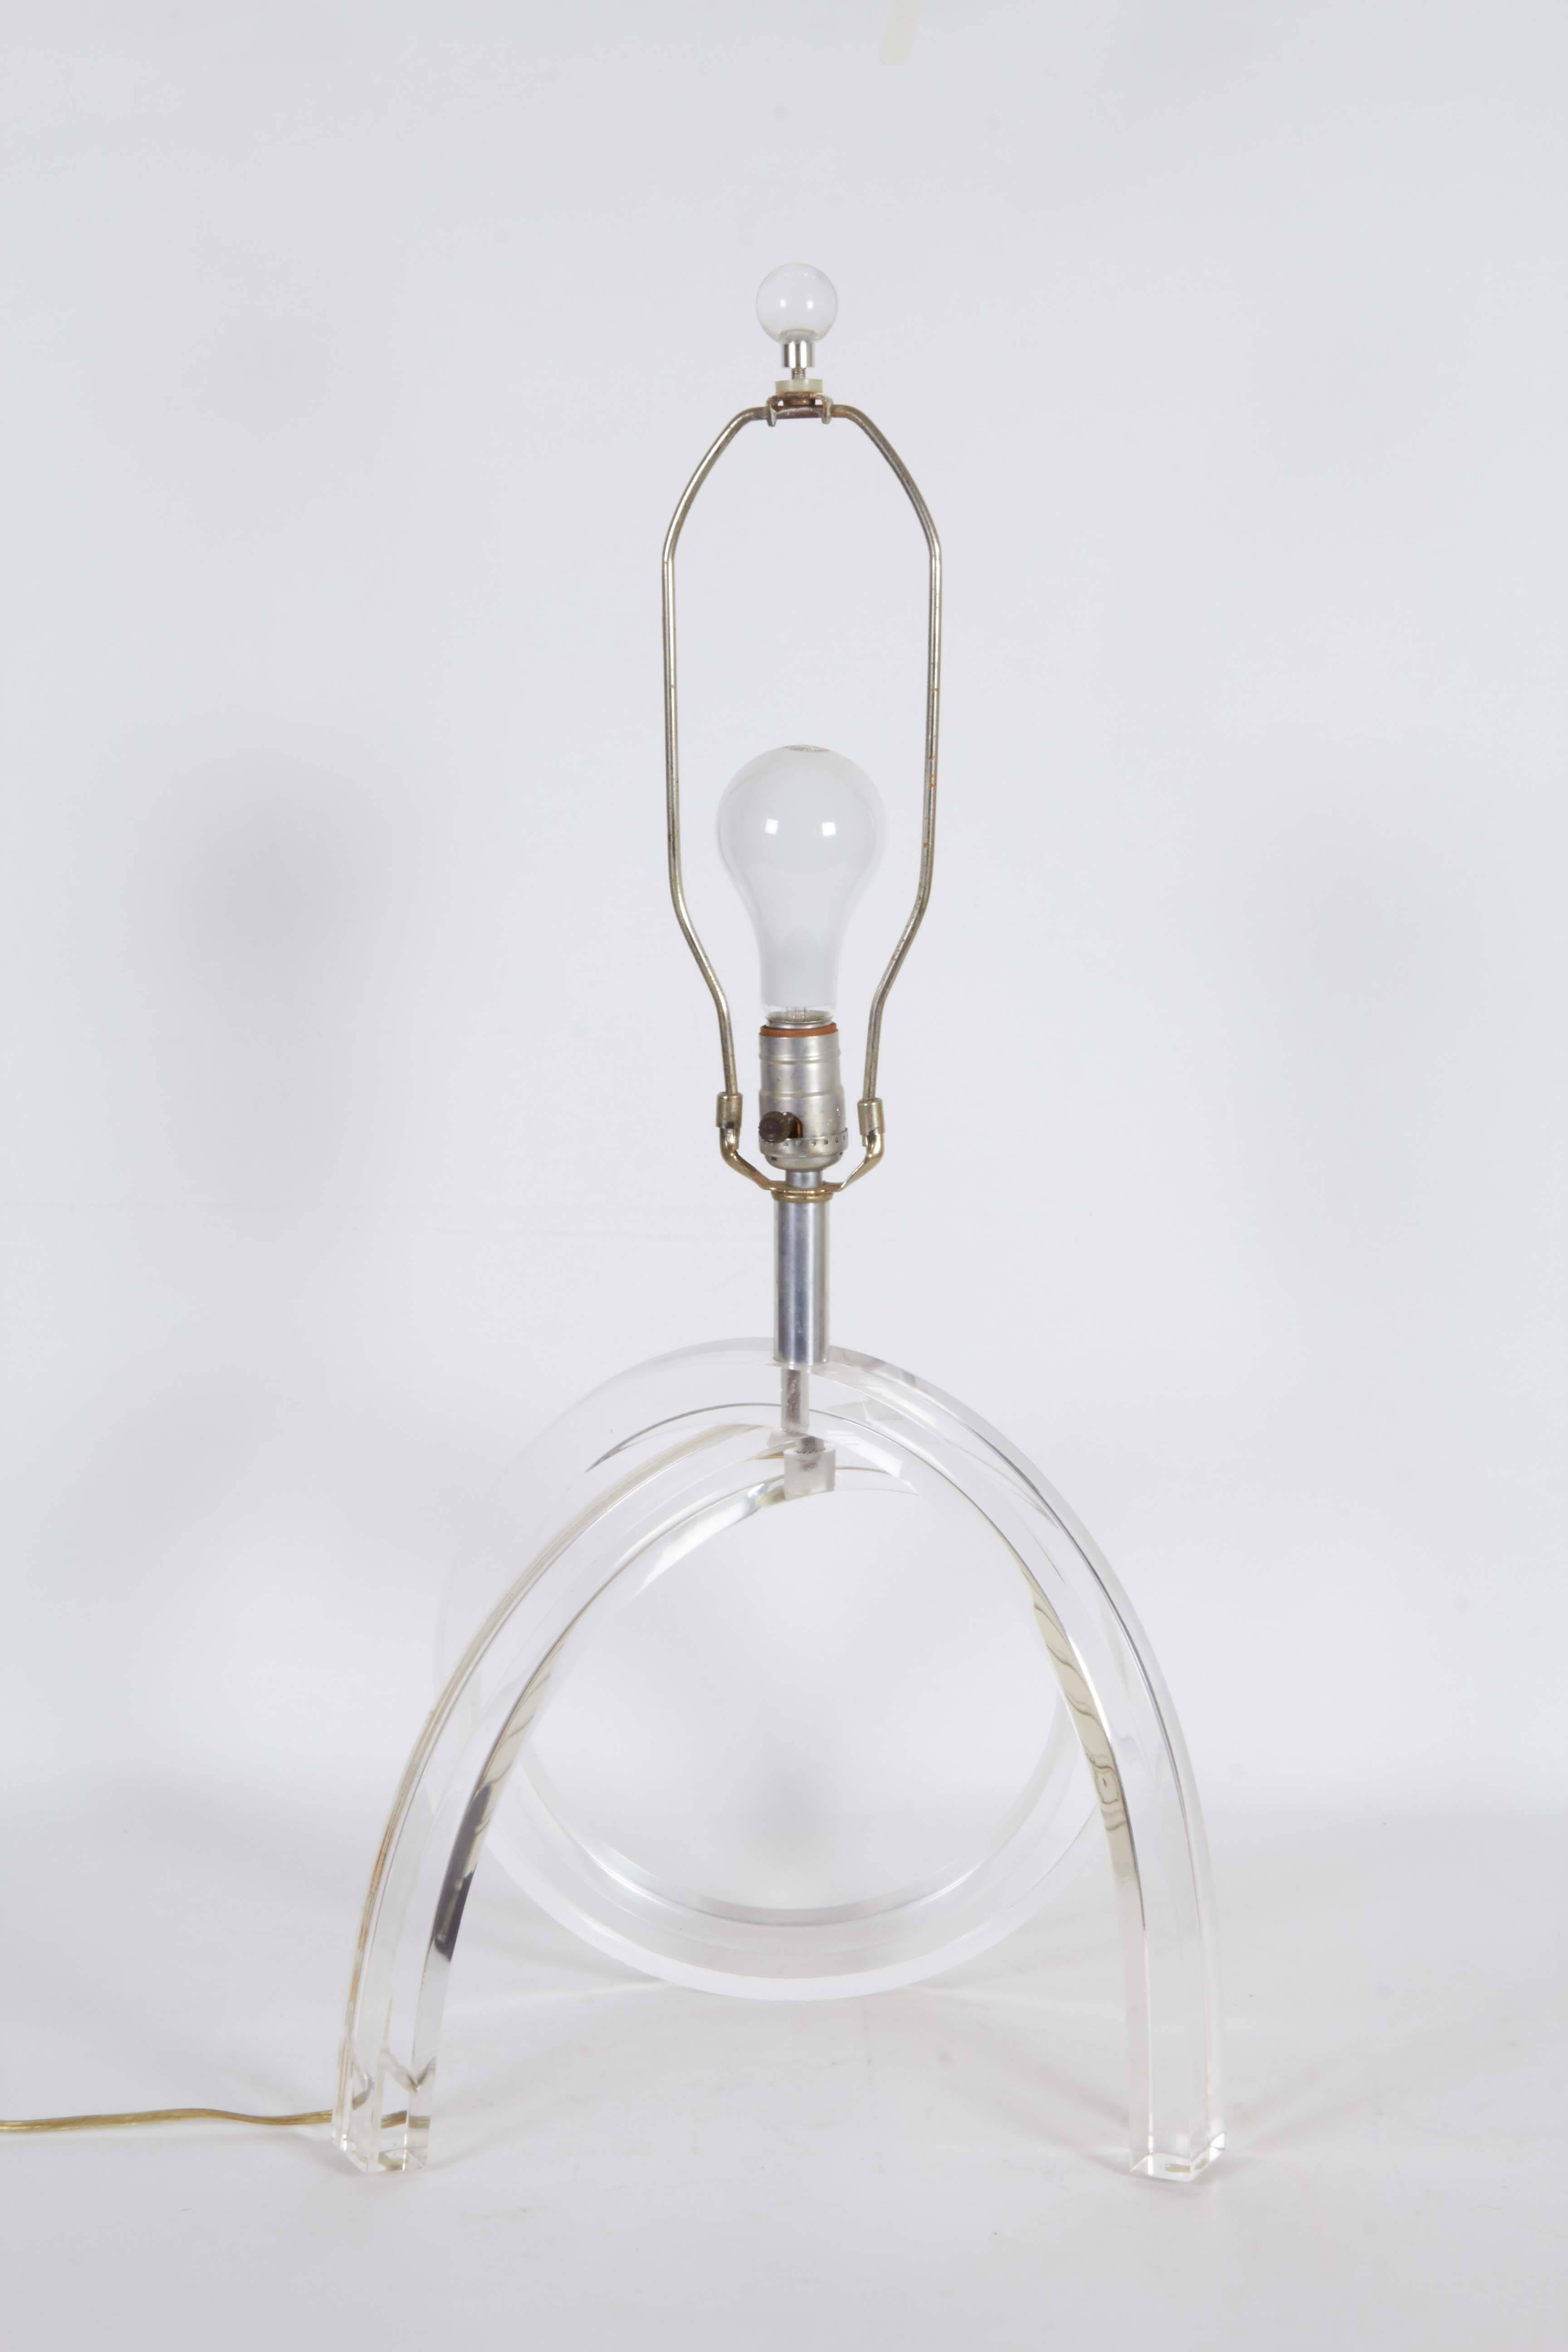 A modern style, circa 1970s table lamp by designer Dorothy Thorpe, single socket on sculptural 'pretzel' form Lucite base; includes matching ball finial. Very good vintage condition, wear consistent with age and use.

10850